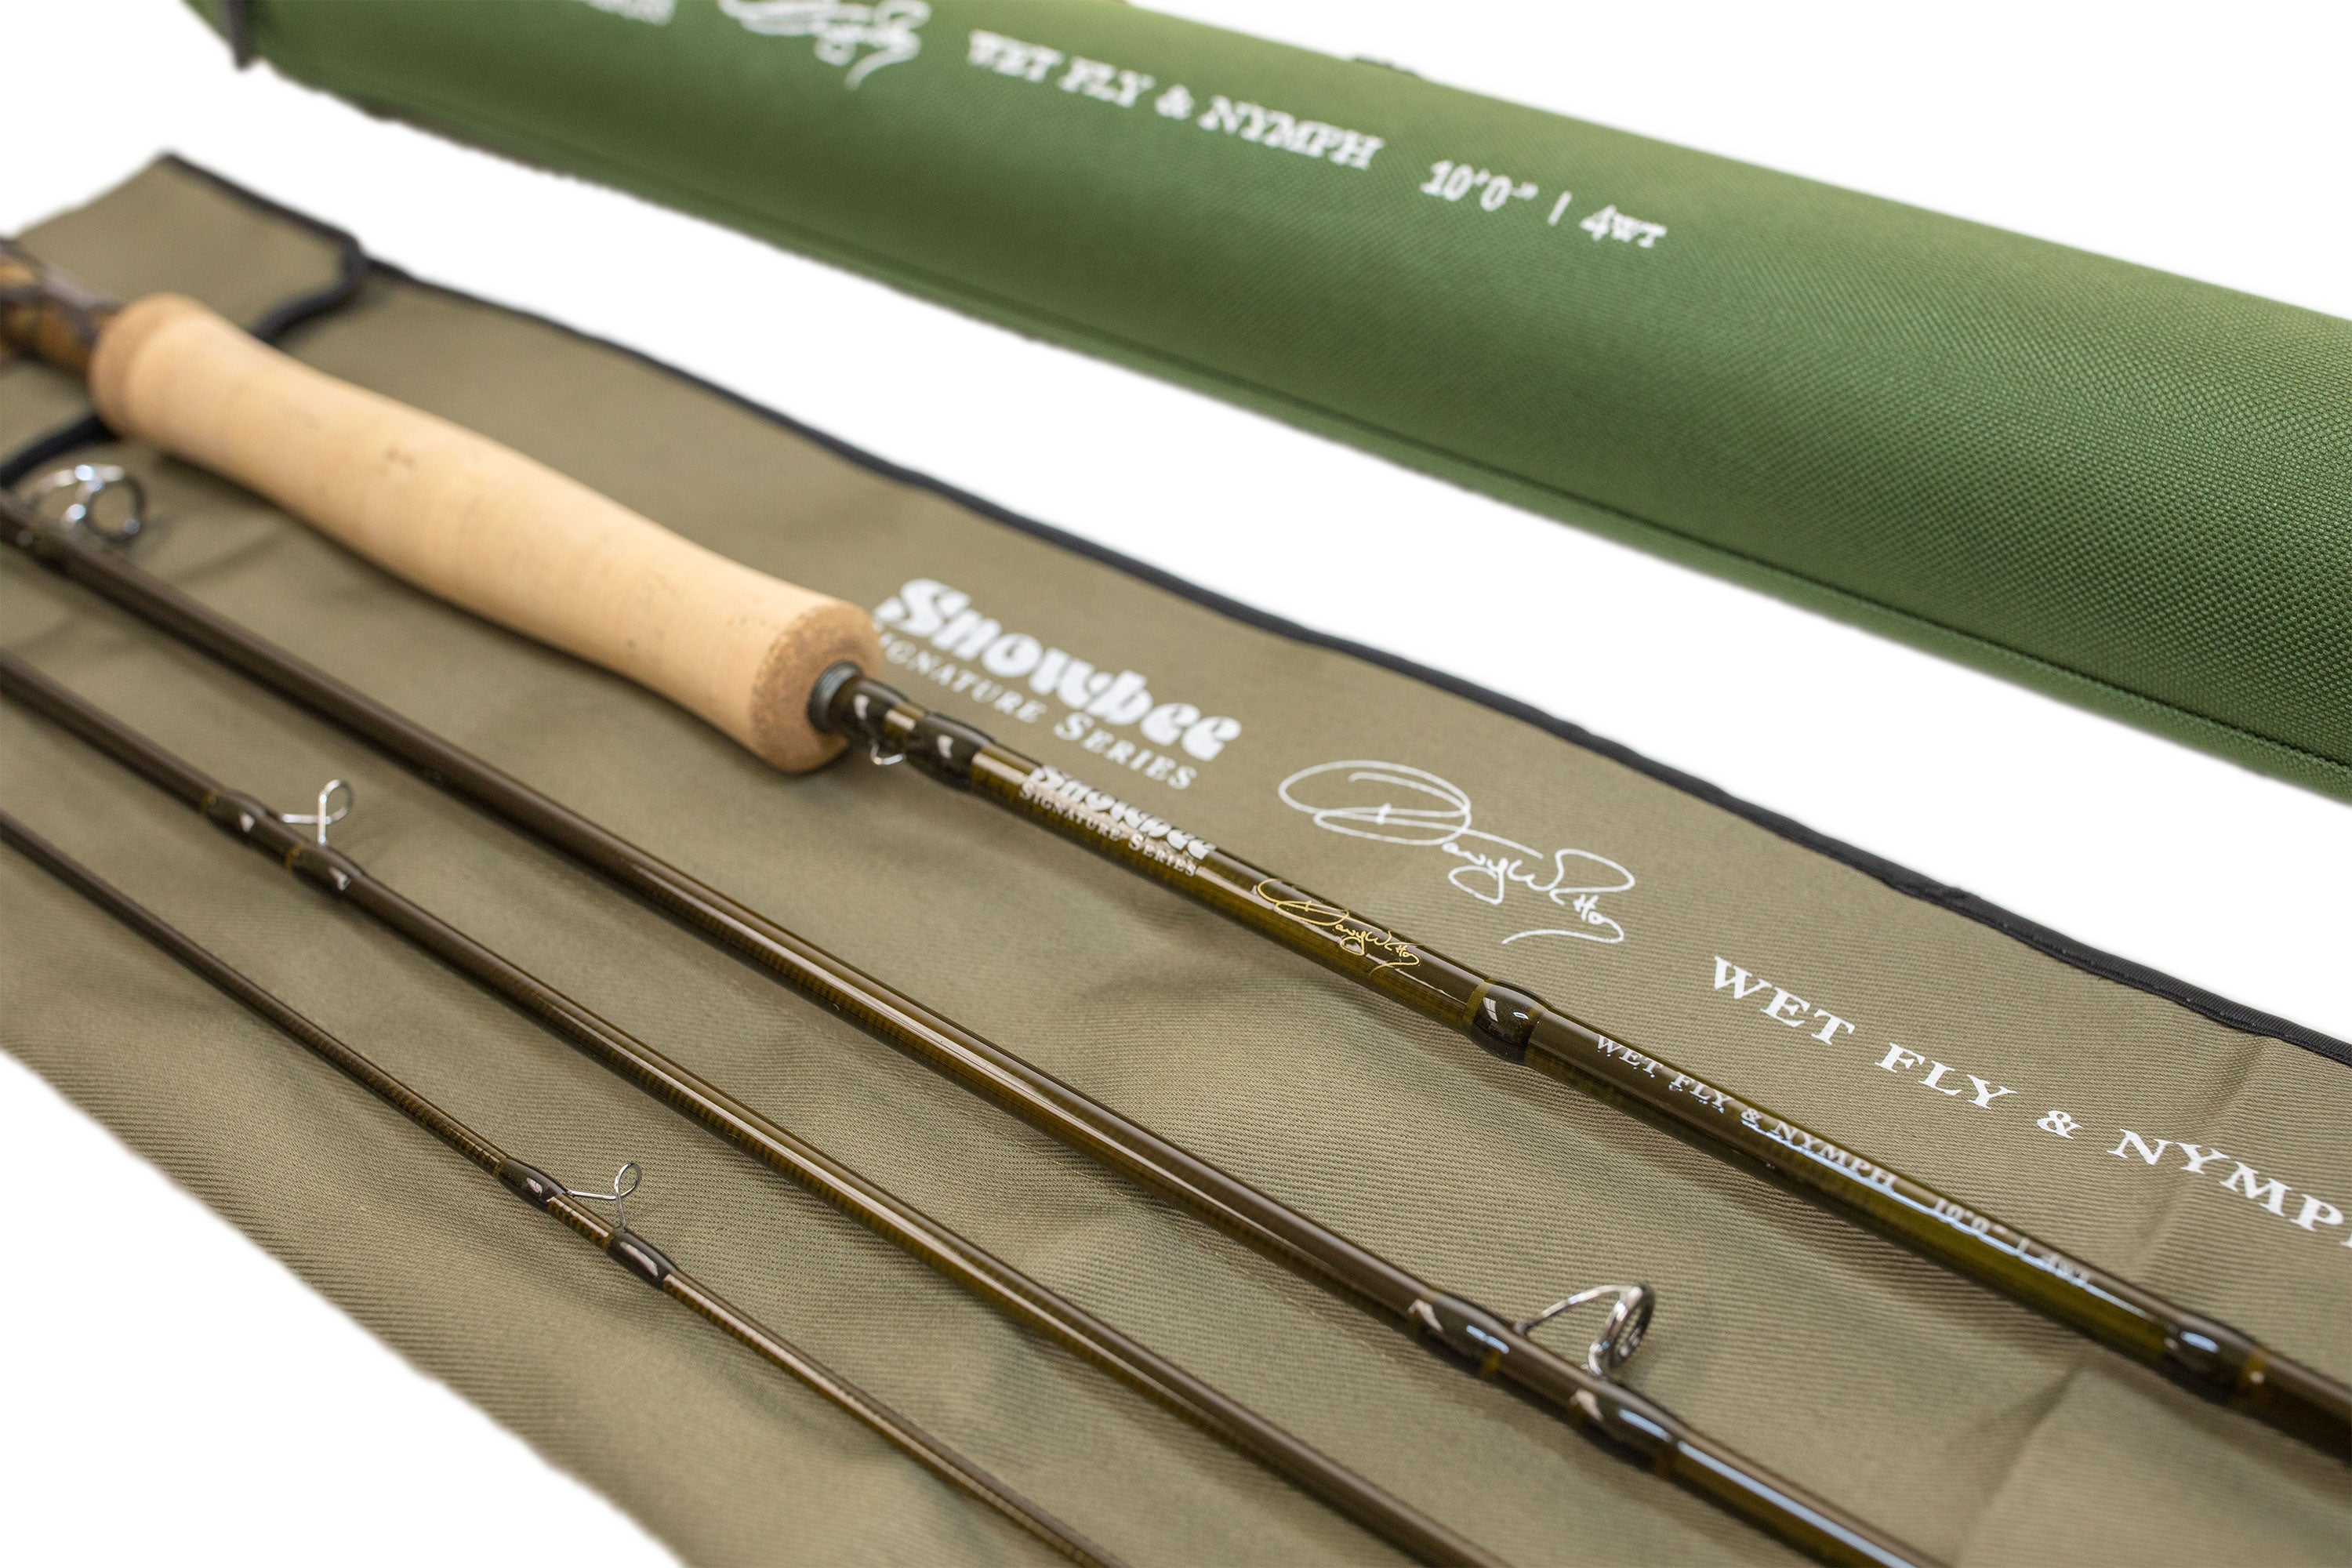 Snowbee Signature Series - "Davy Wotton" Wet Fly & Nymph Fly Rod | 10'0" 4wt